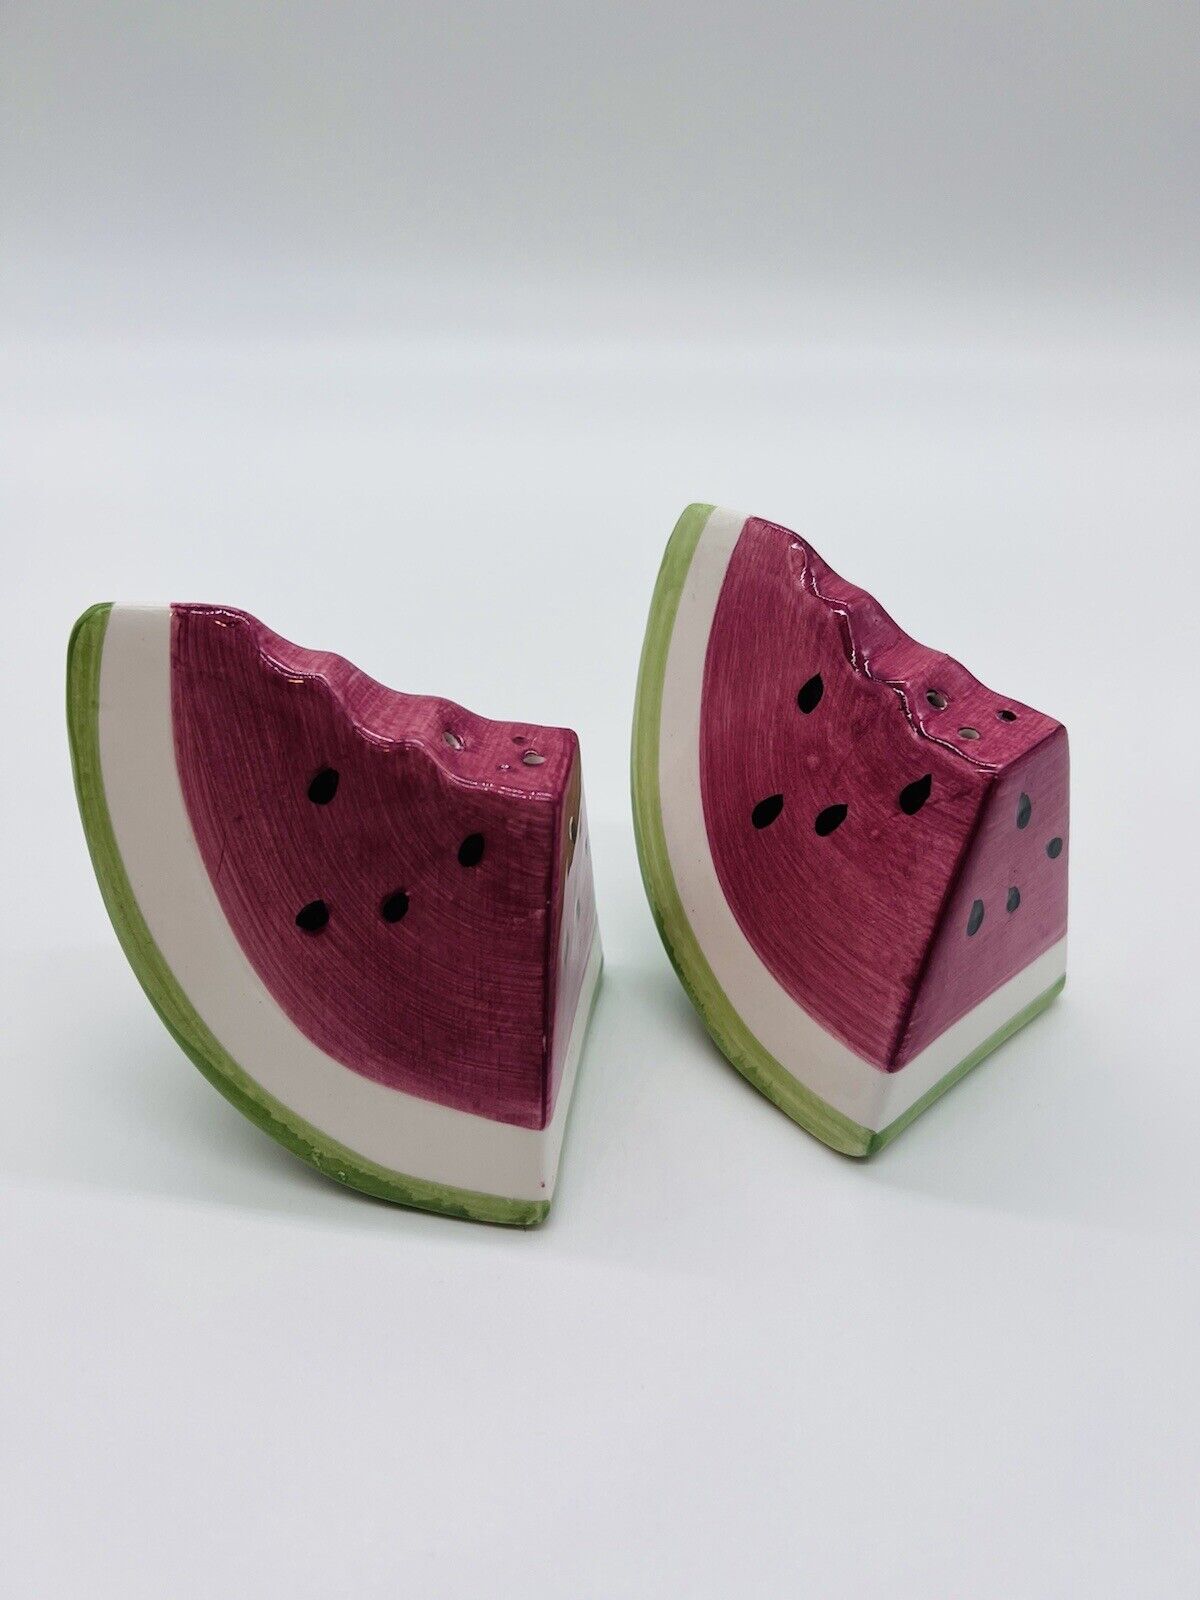 Watermelon Slices Salt & Pepper Shakers With Rubber Stoppers Summer 